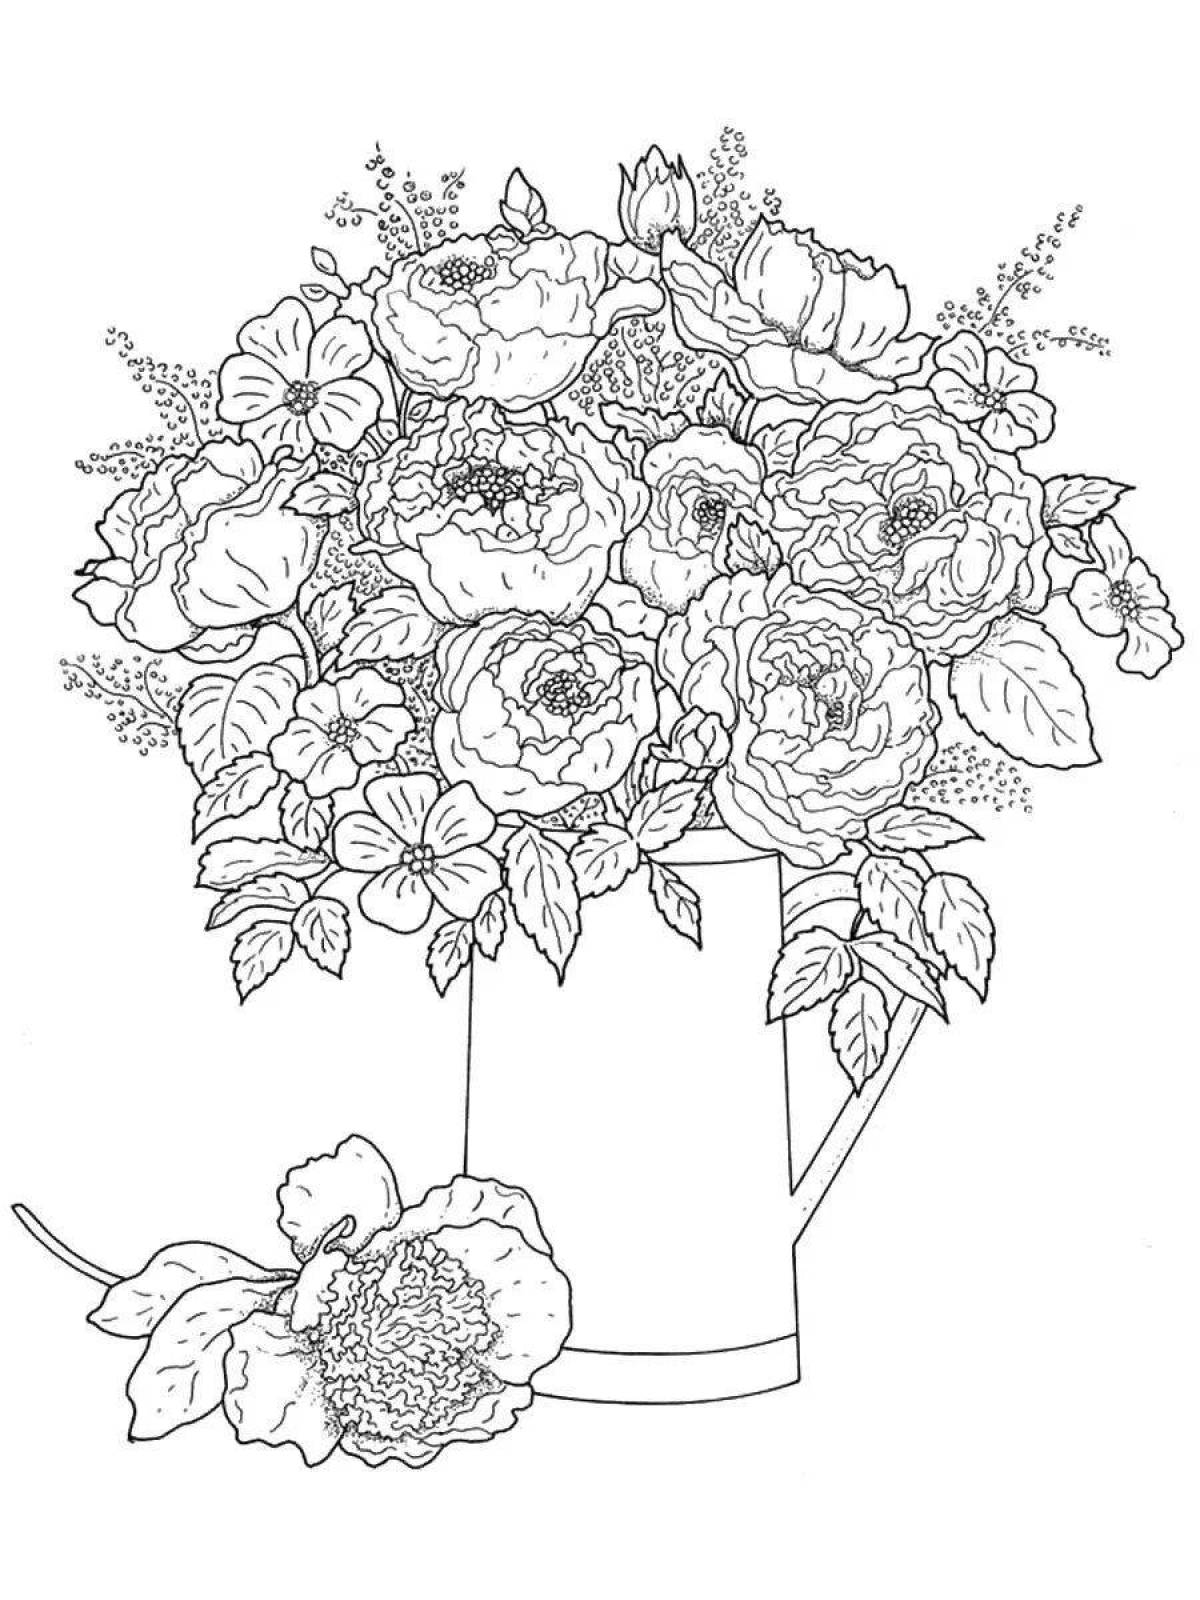 Colouring serene bouquet in a vase